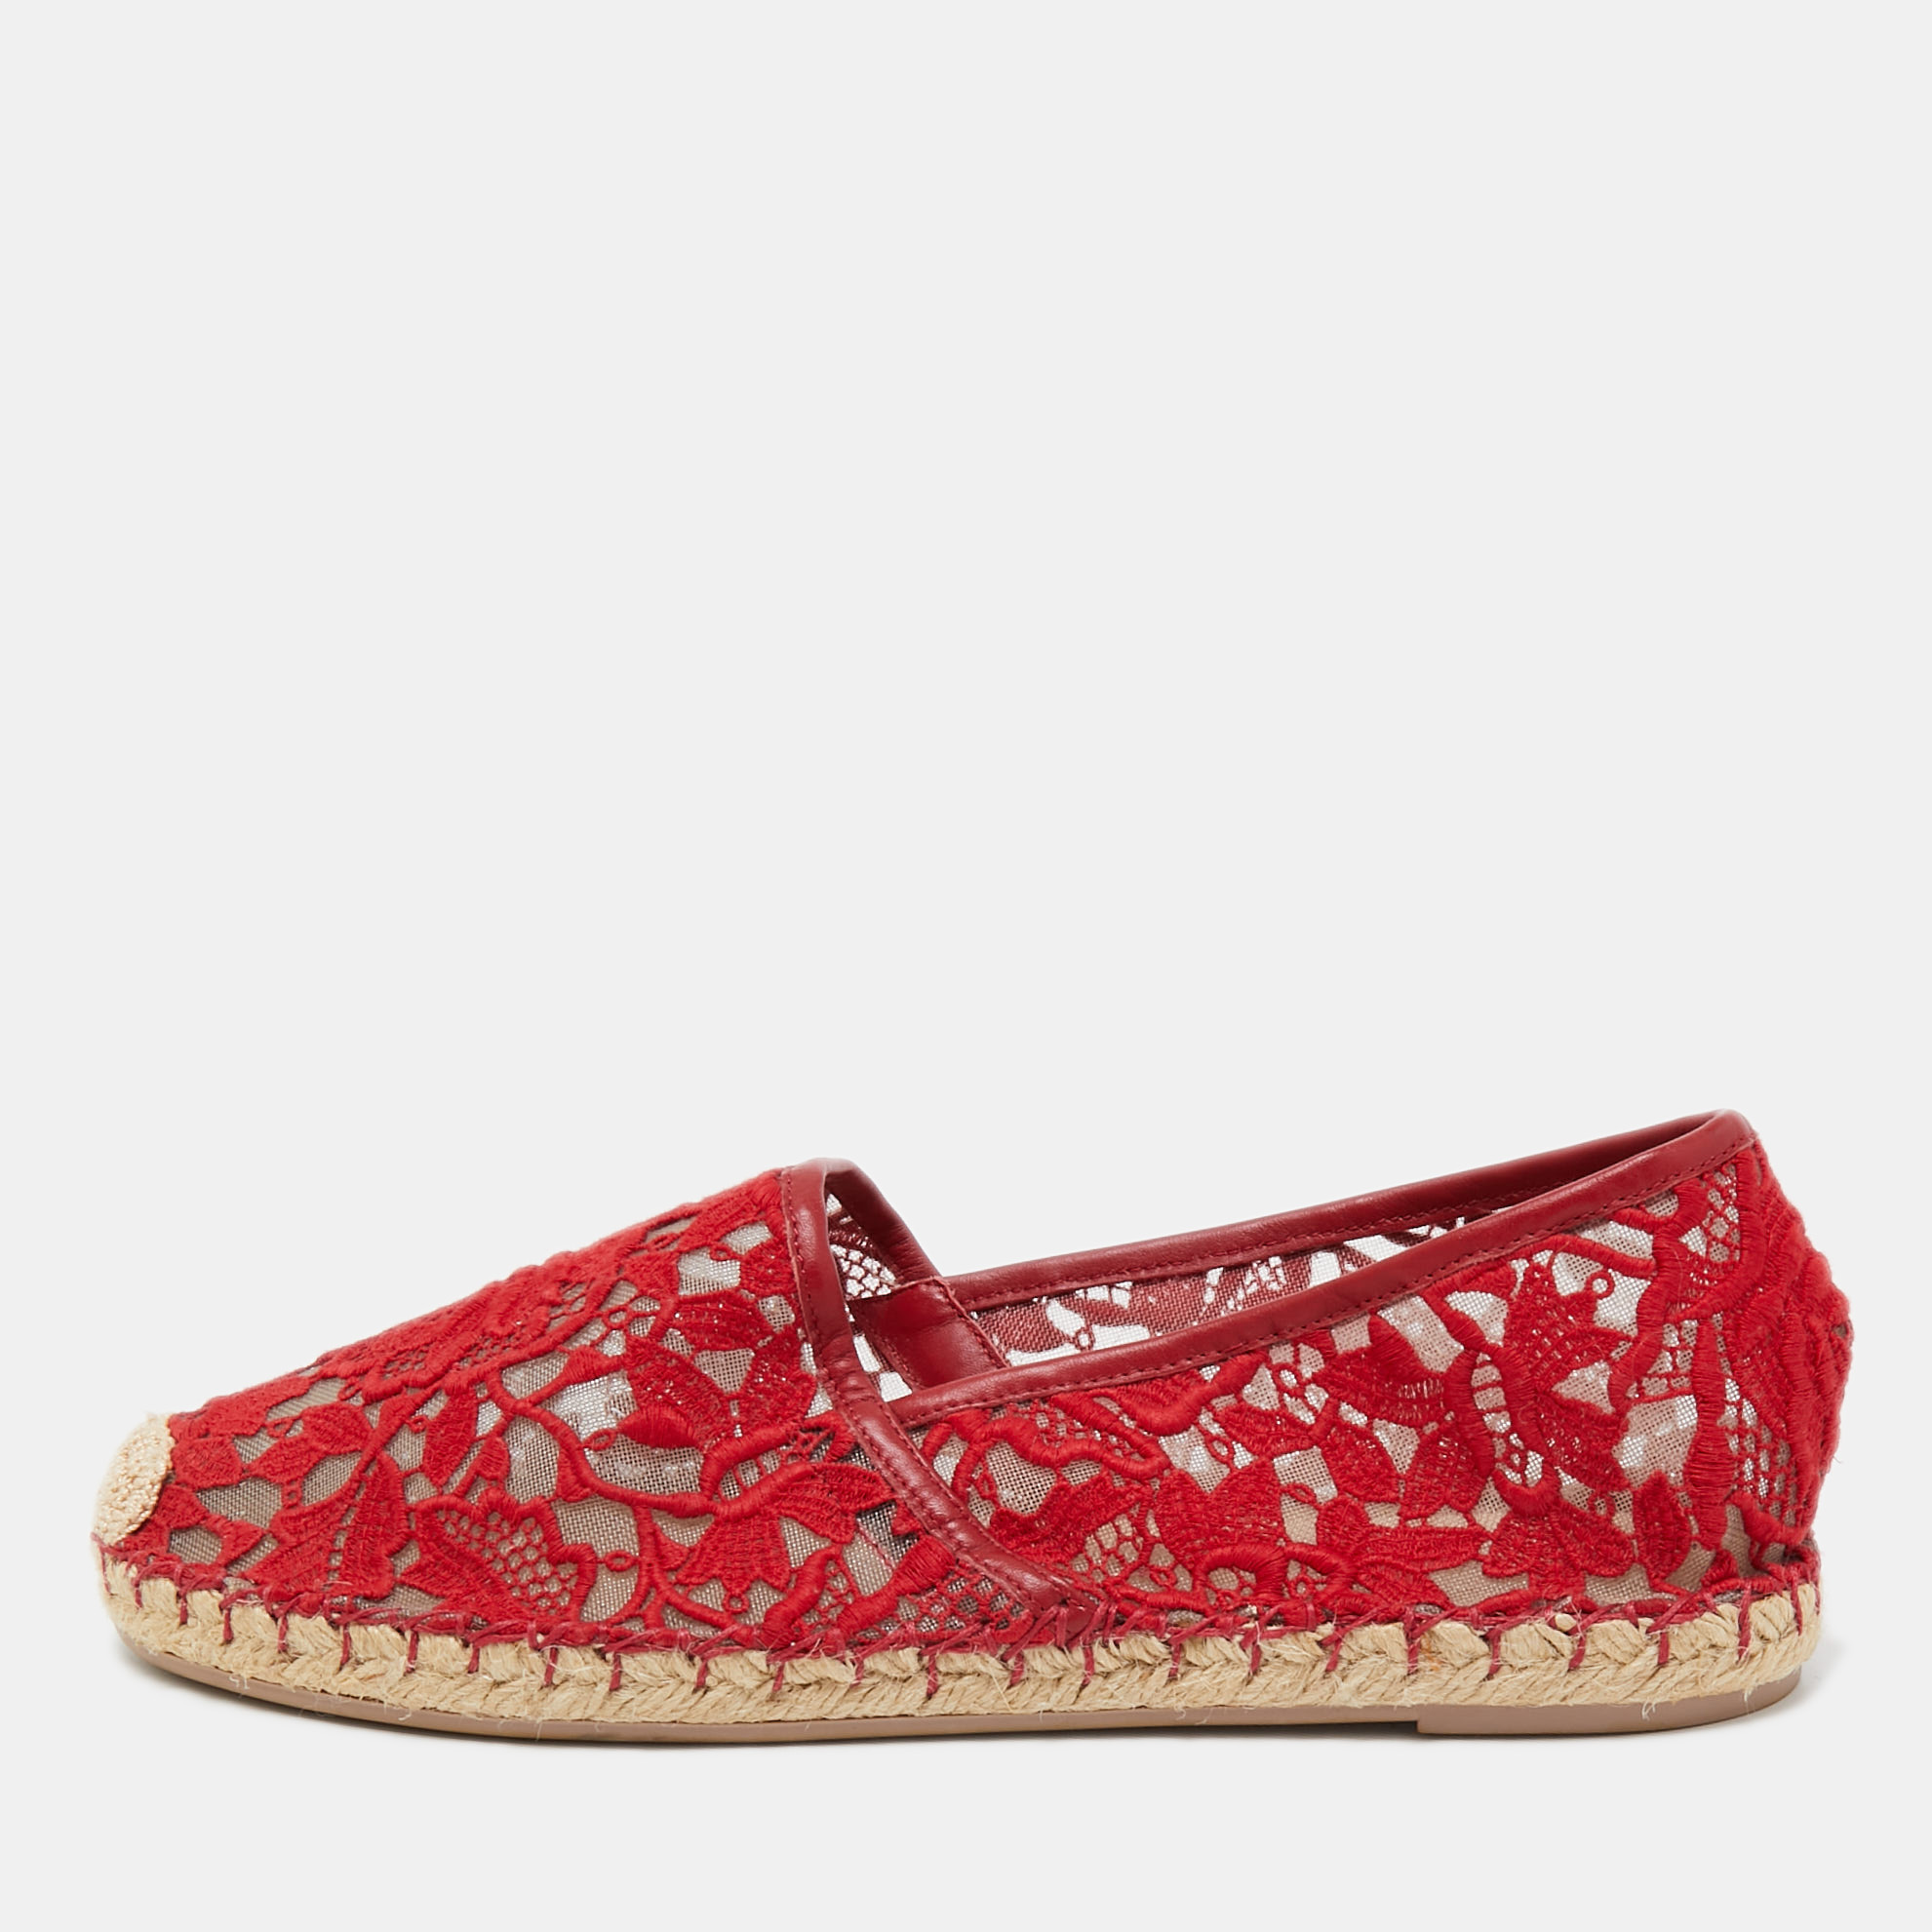 Valentino Red Floral Lace Espadrille Flats Size 39